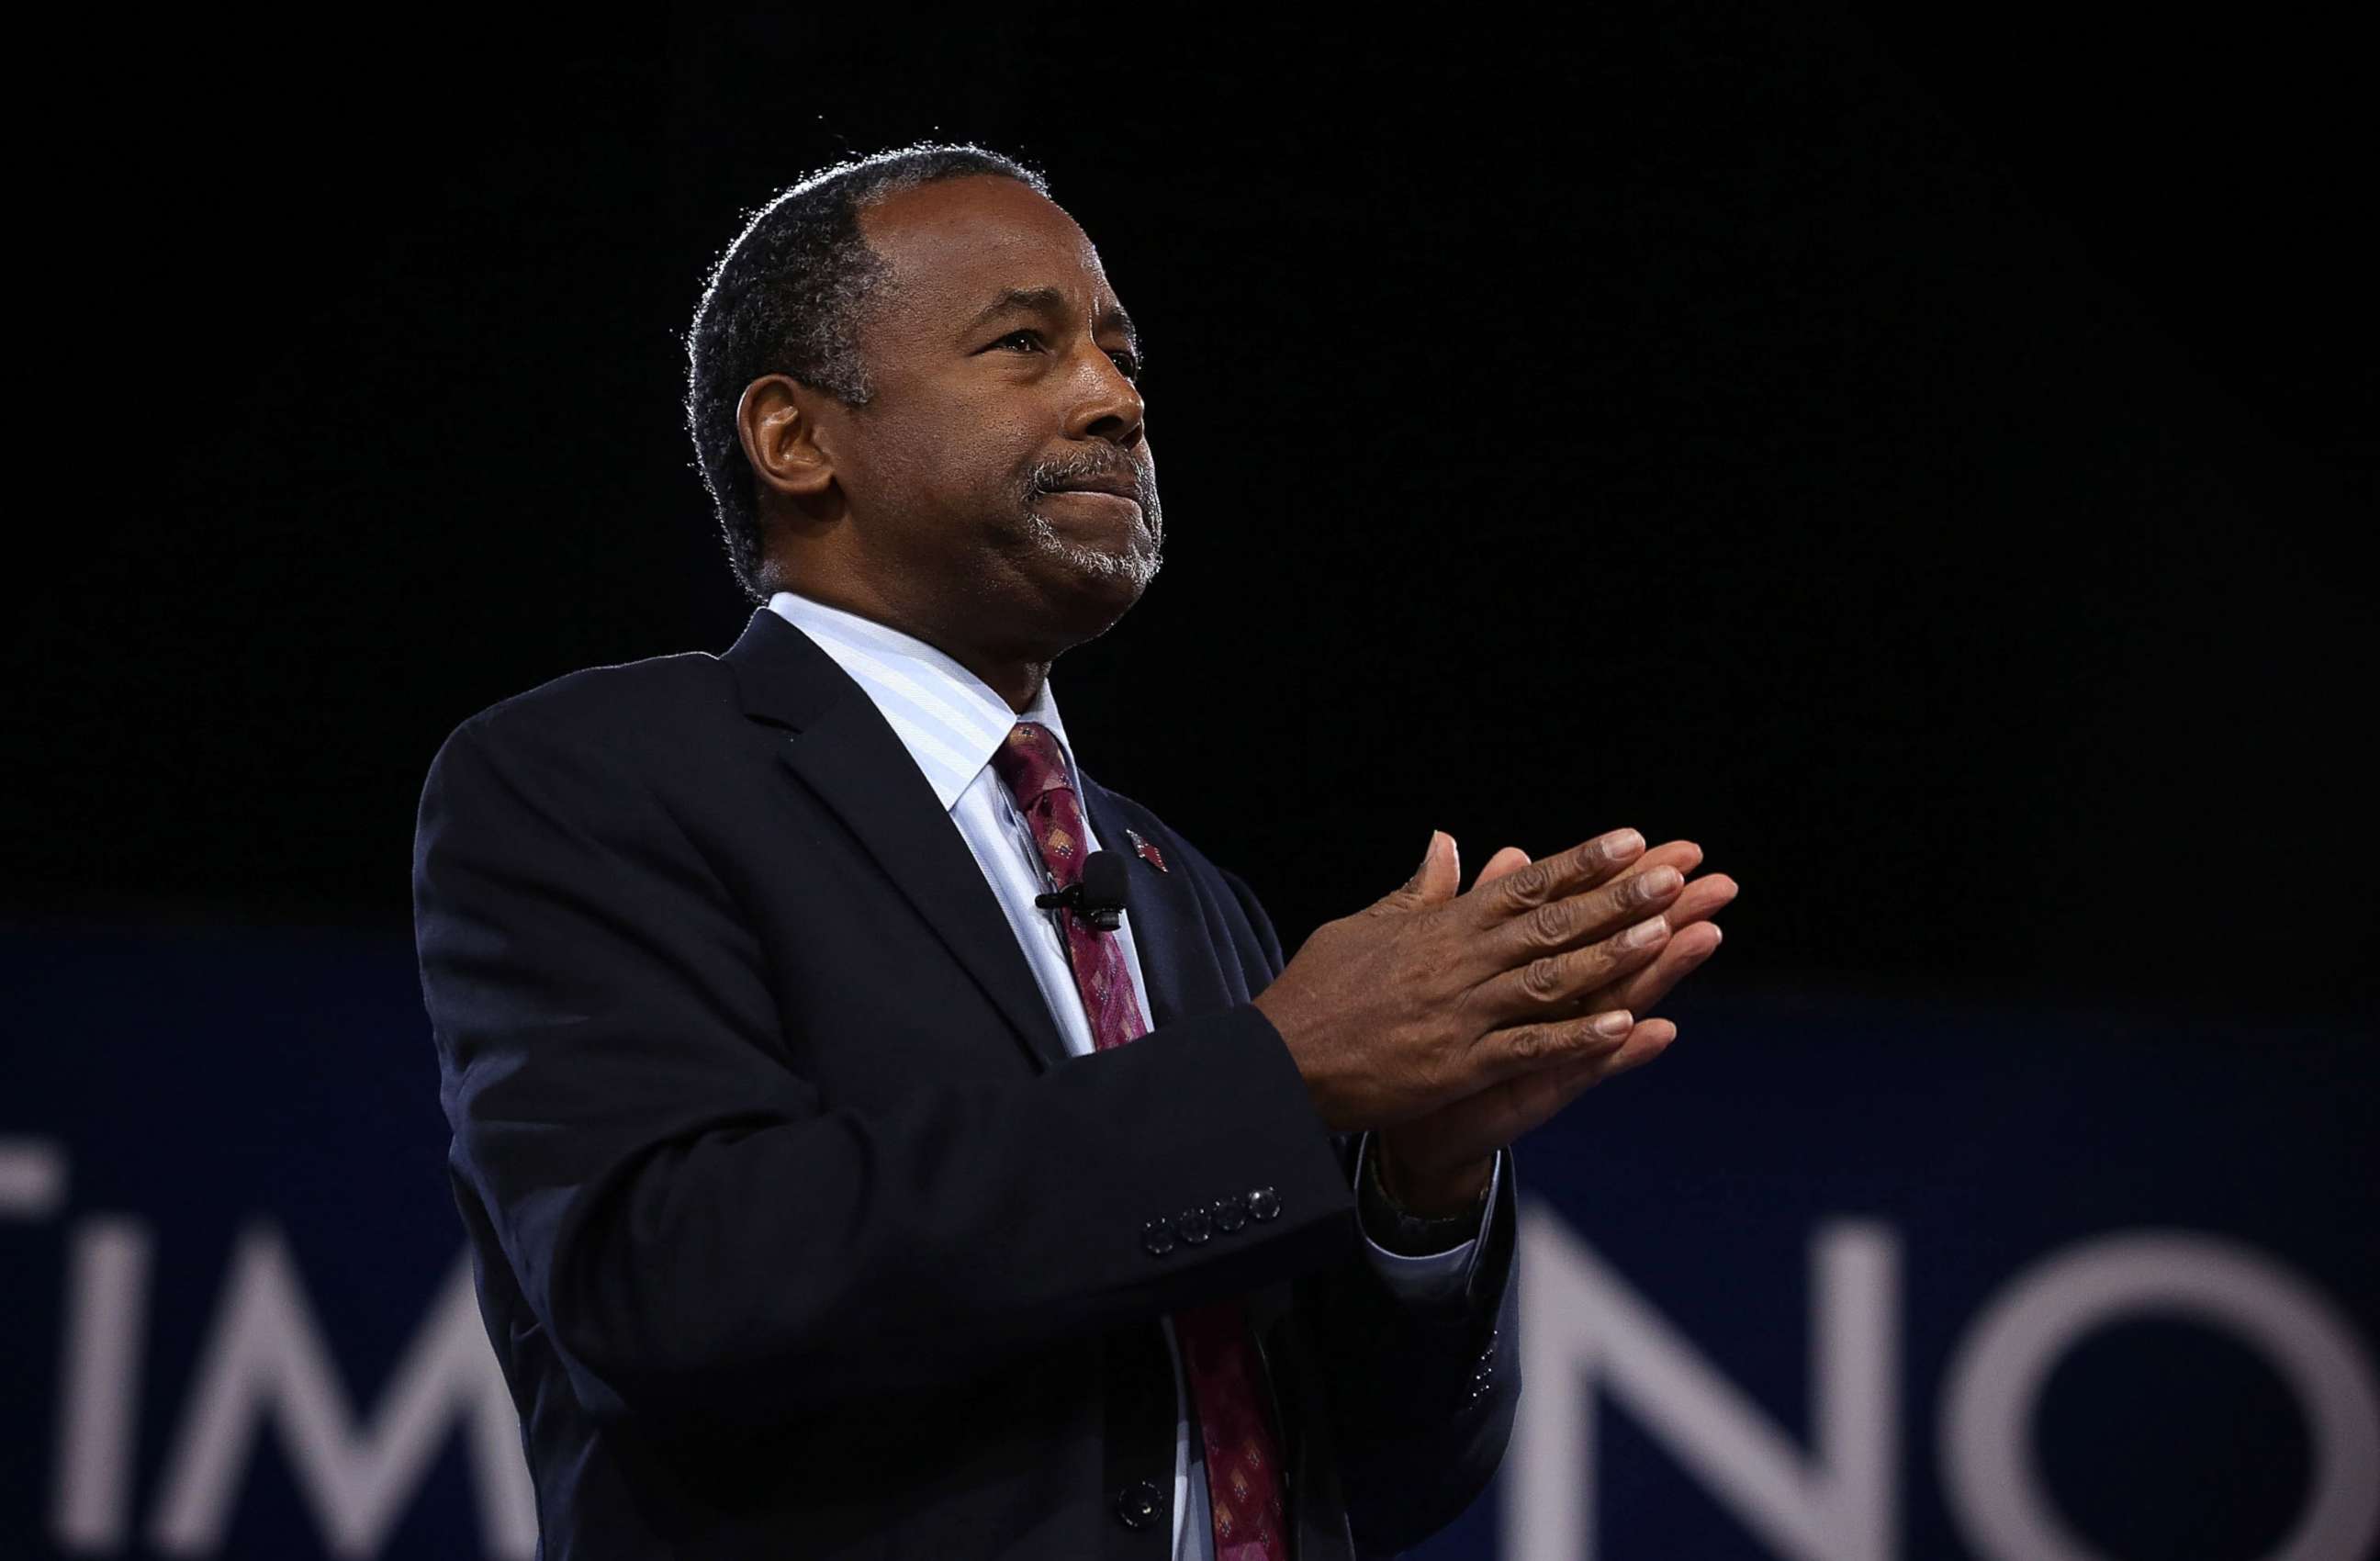 PHOTO: FILE PHOTO: Ben Carson speaks at CPAC 2016 March 4, 2016 in National Harbor, Maryland.